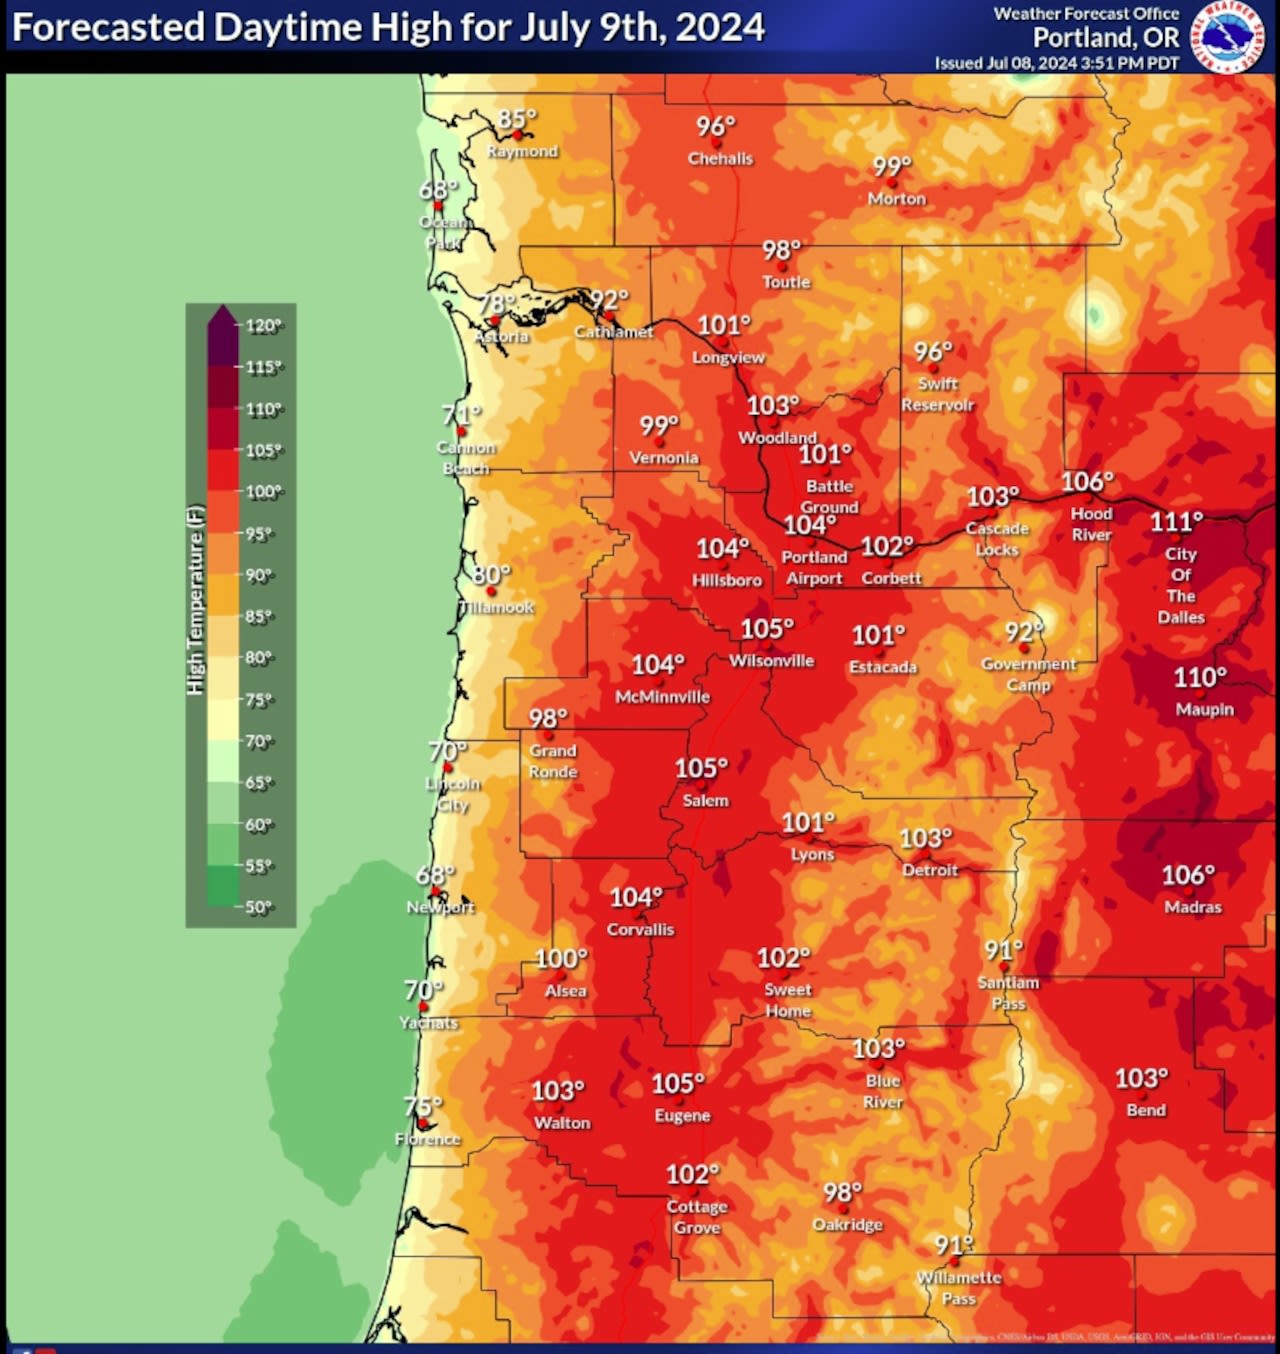 New Oregon weather map shows where high temps Tuesday might hit 110+